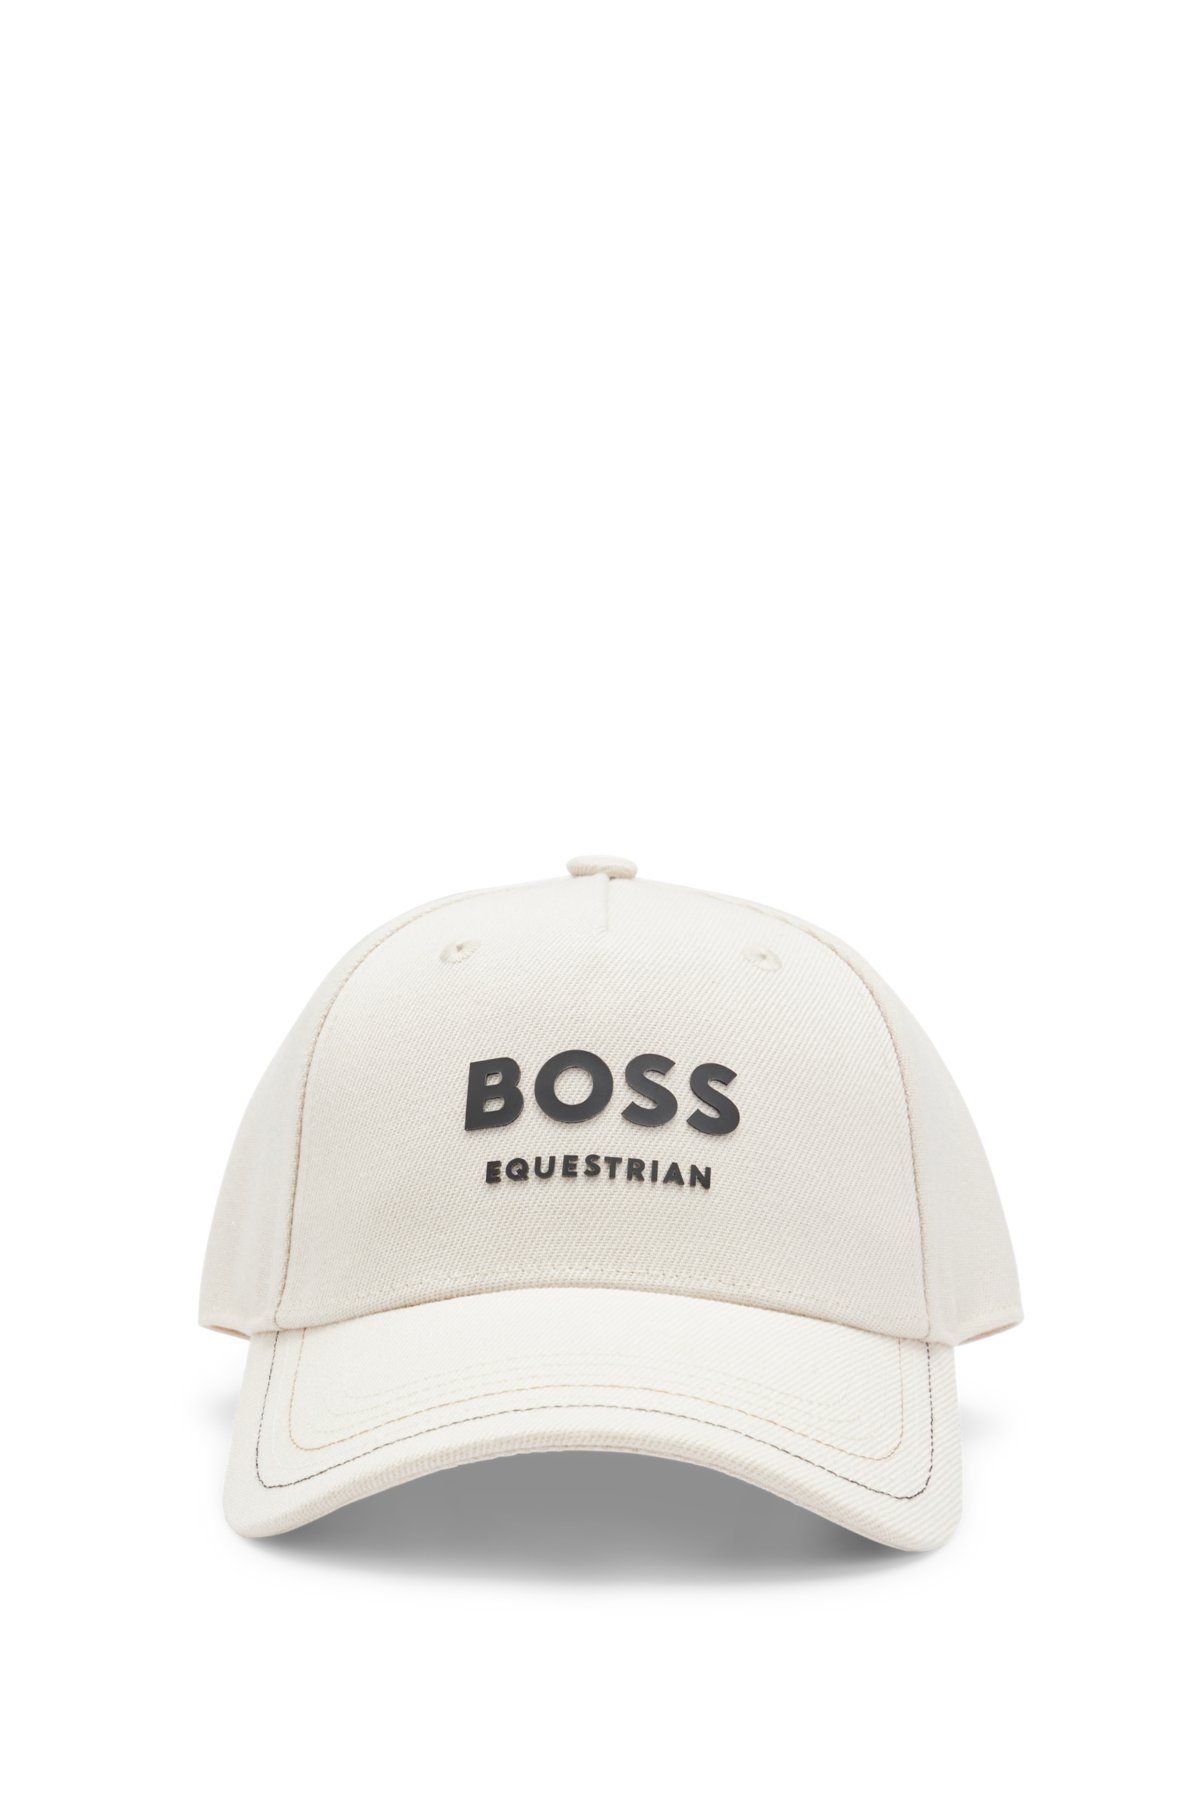 details BOSS Equestrian - with cap logo five-panel